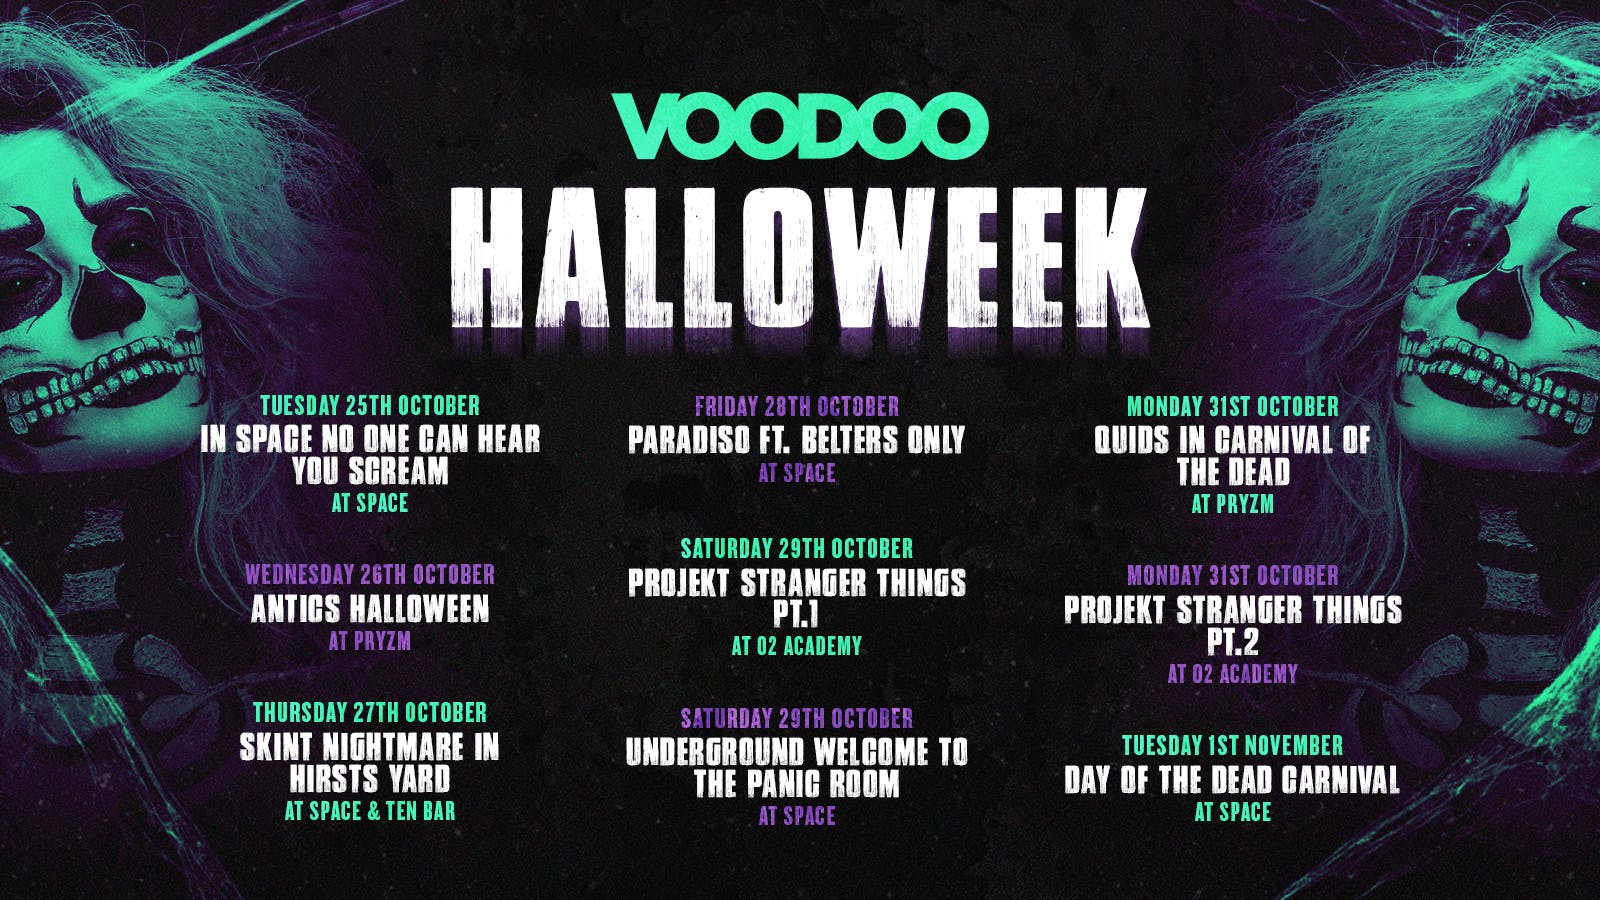 The Voodoo Halloweek! 👻 – TICKETS WILL SELL OUT!